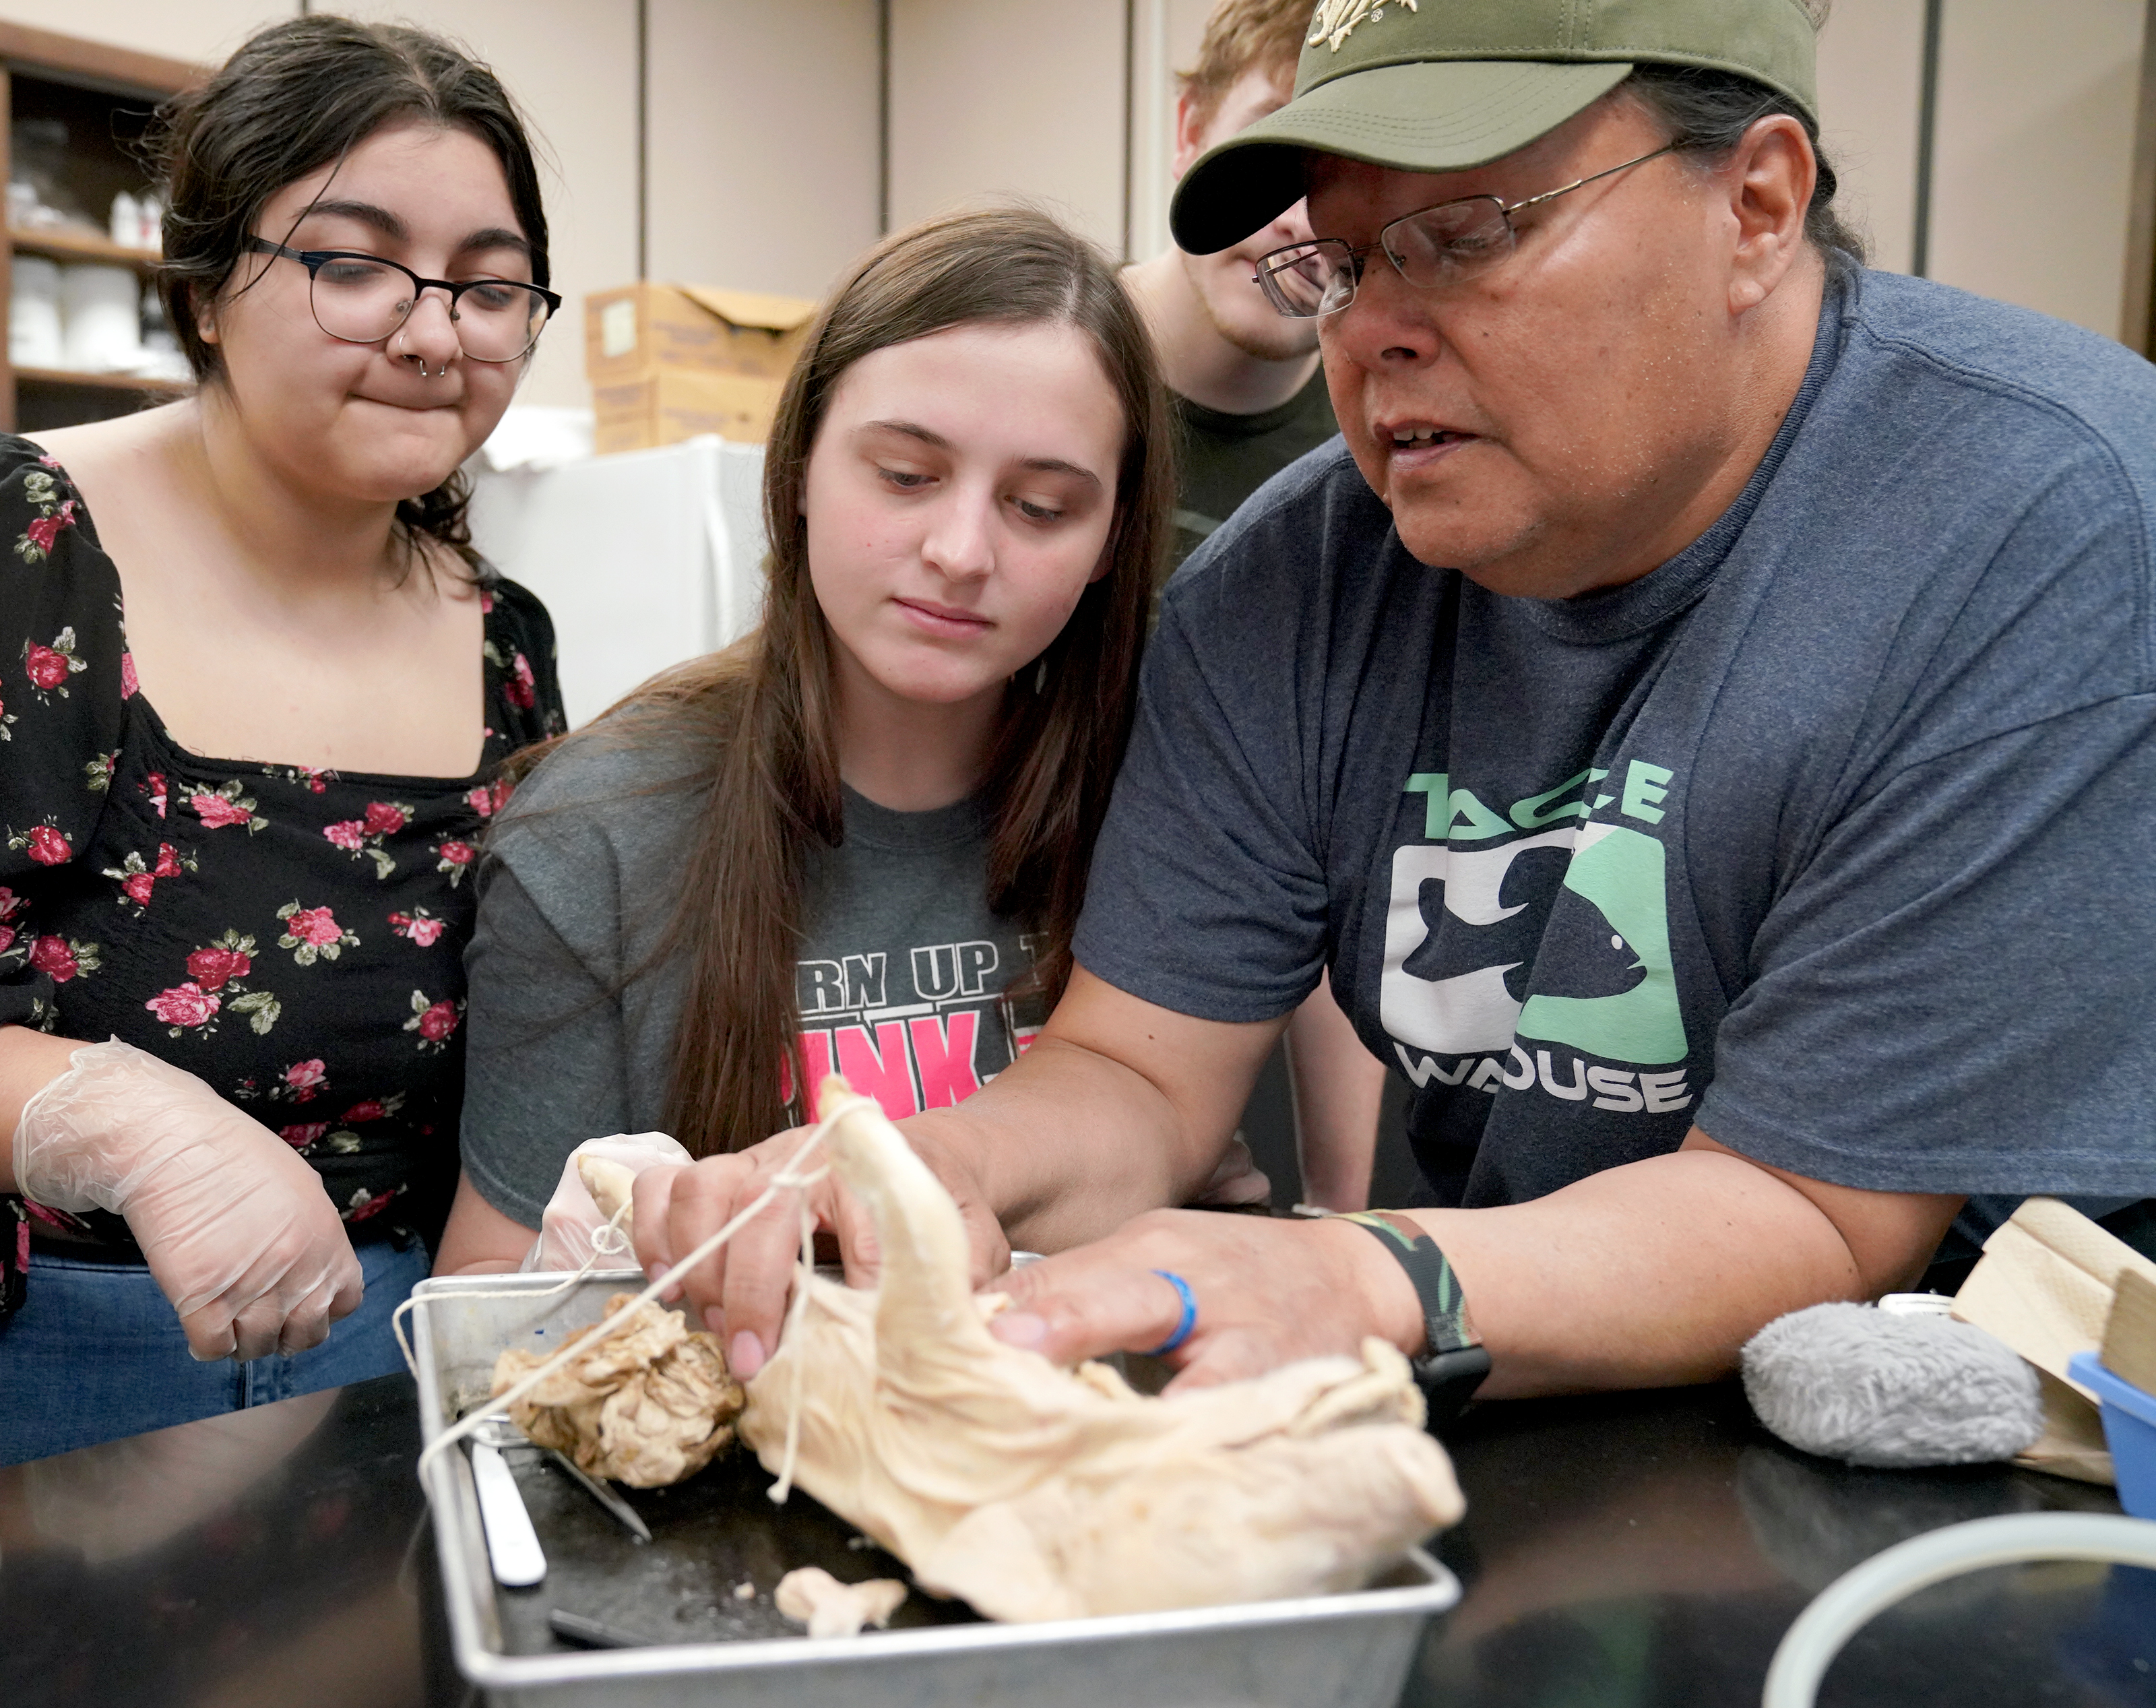 Carl Sandburg College student Kathryne Herslow (center) looks on as associate professor of biology Dave Burns assists with dissecting a pig in his anatomy & physiology course.